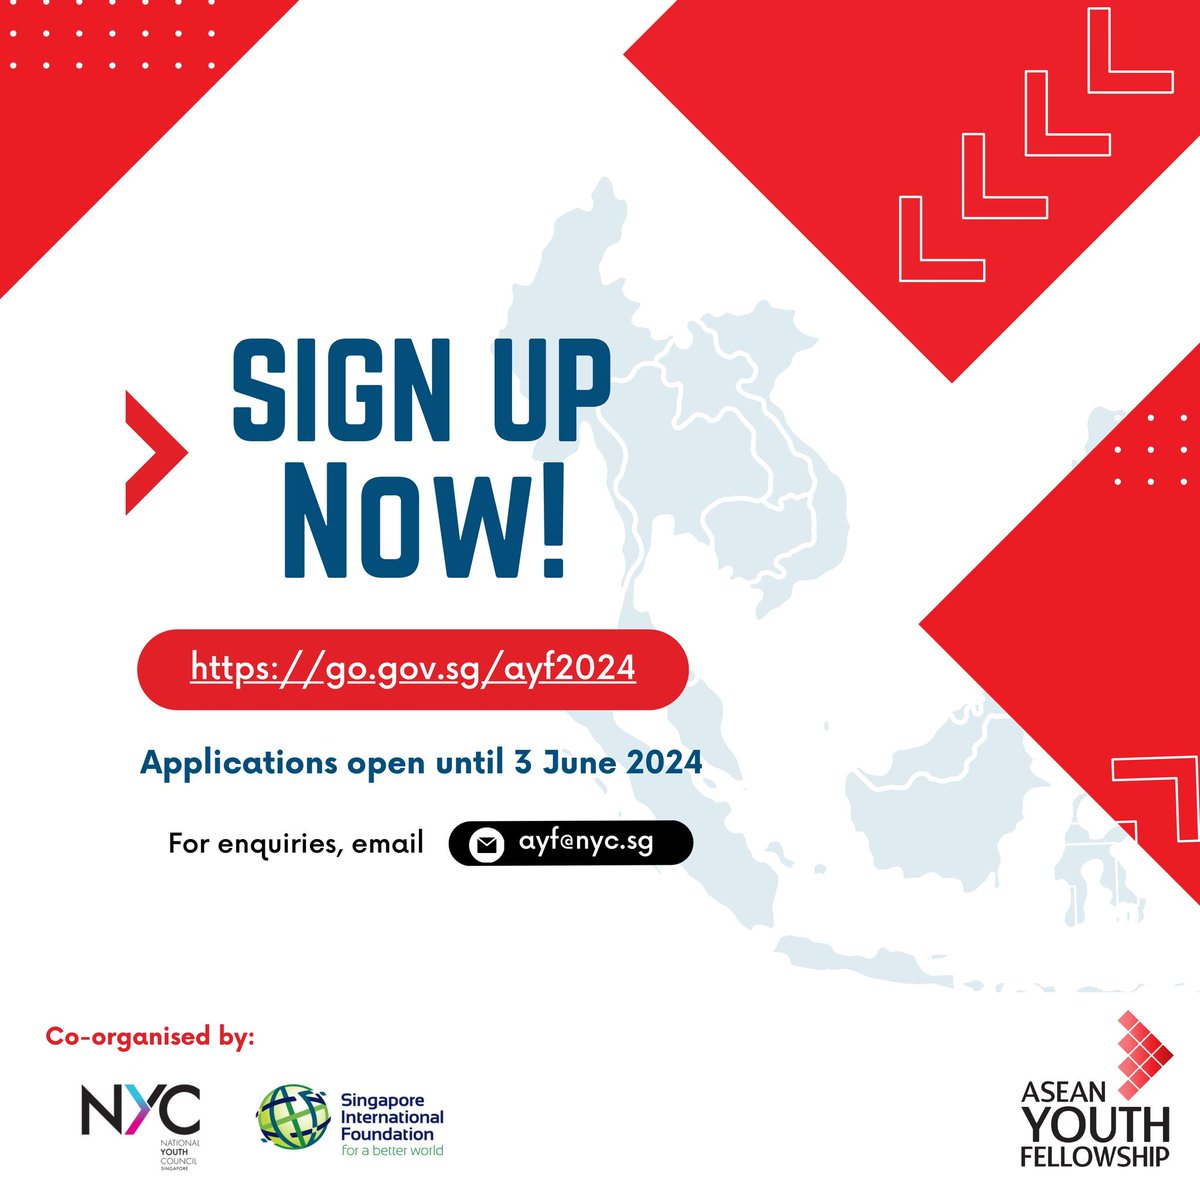 Calling all emerging youth leaders in the ASEAN region! We are excited to announce the 6th ASEAN Youth Fellowship in collaboration with @nycsg, set to take place in Singapore and Laos this year. Find out more below and submit your application at: go.gov.sg/ayf2024